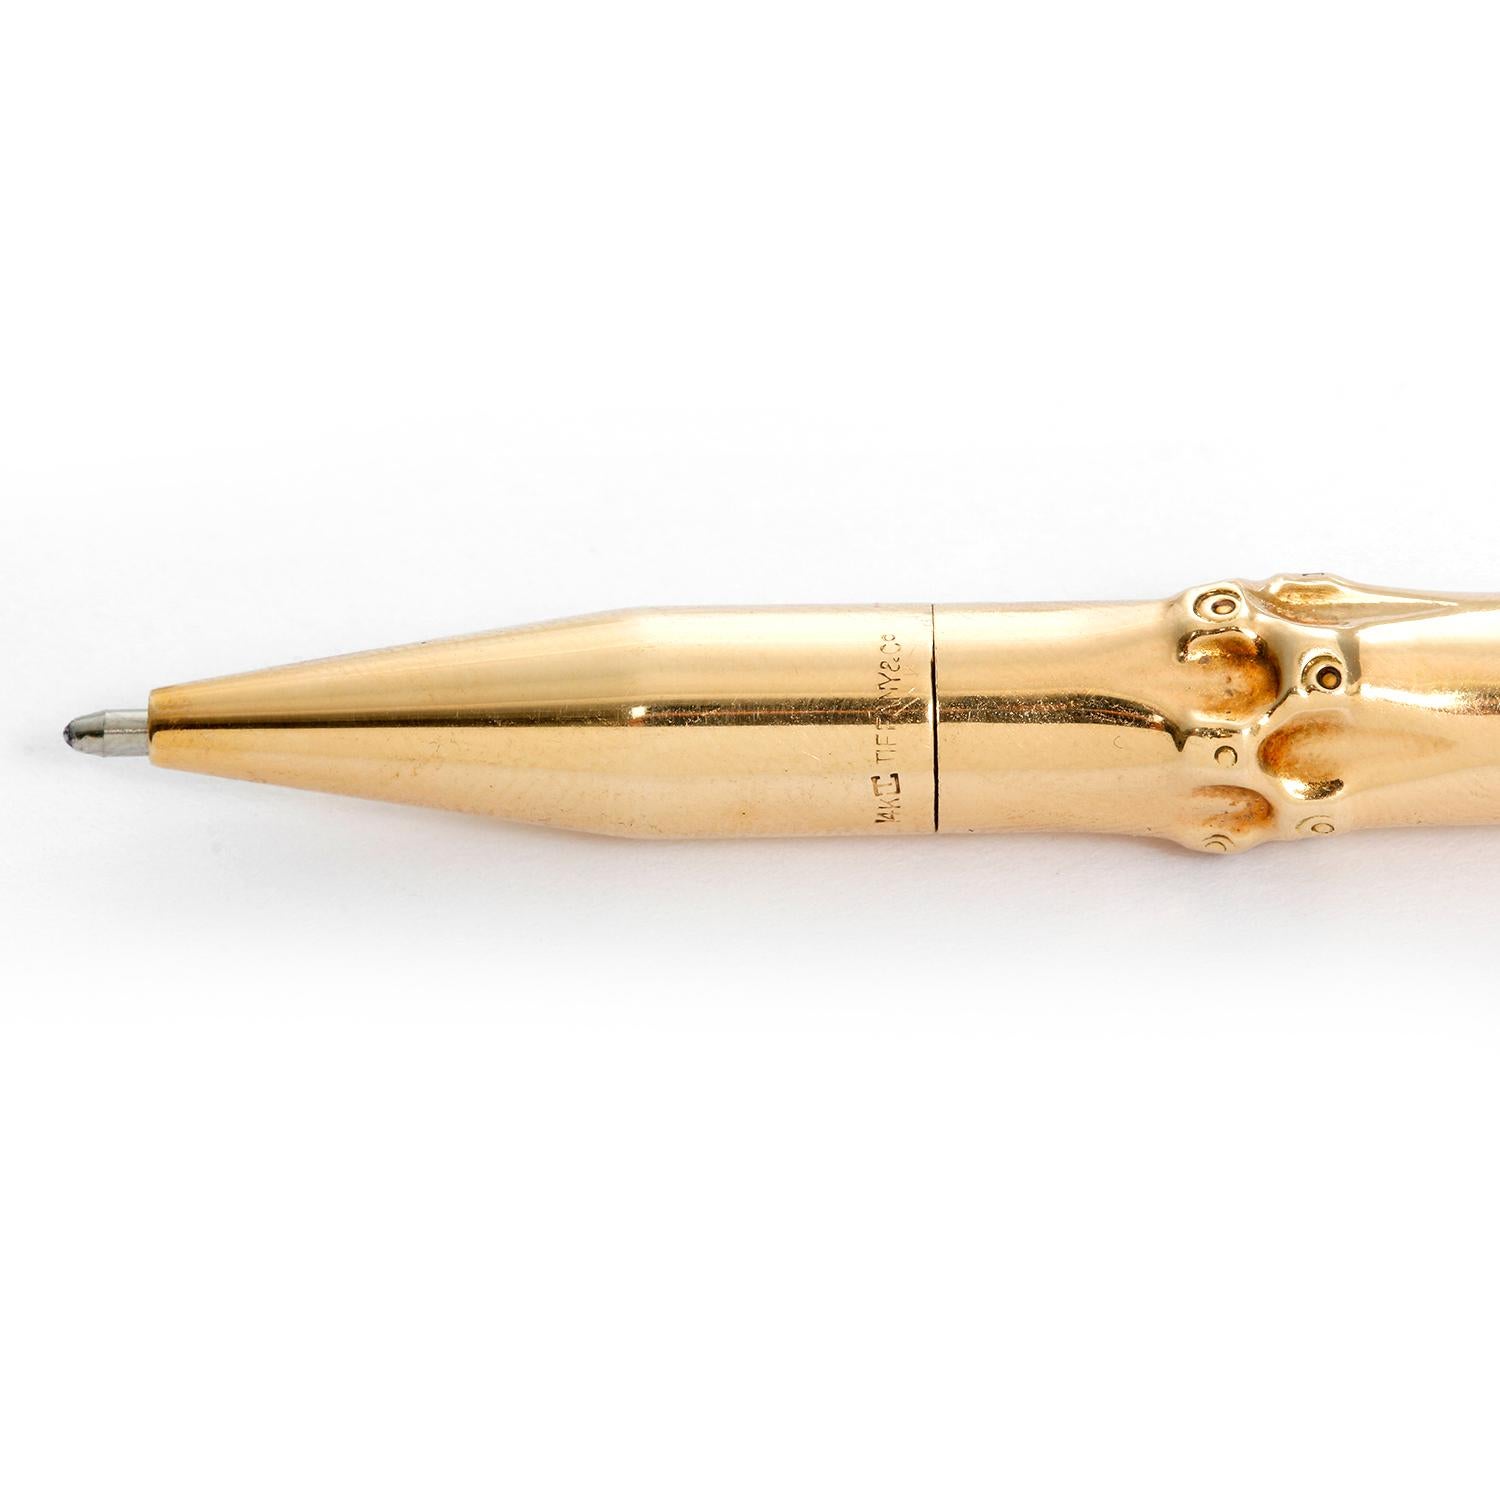 Tiffany & Co. 14K Yellow Gold Bamboo Ink Pen  - Blue Ink Cartridge. 14K Yellow Gold. Bamboo design with an extra cartridge. Total length 4 1/1 inches. Total weight 20 grams .